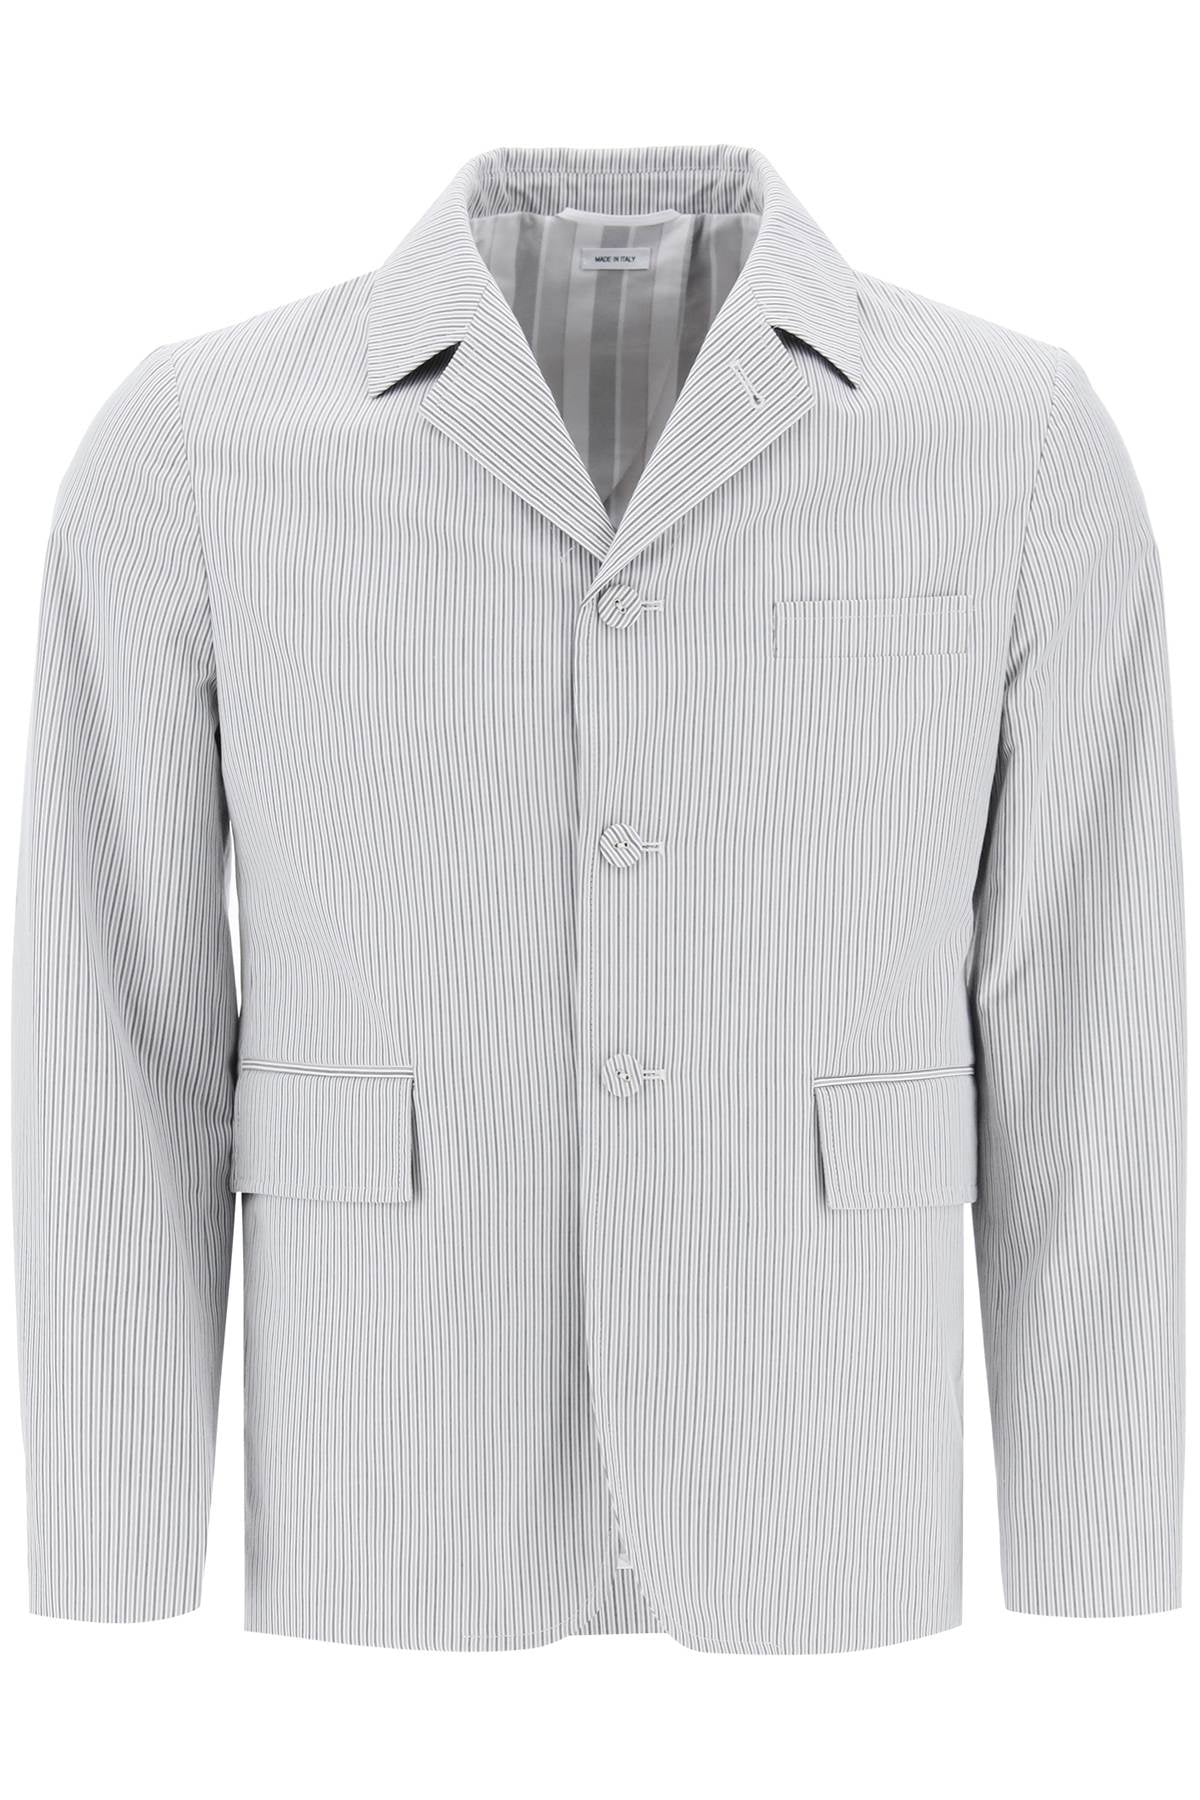 Thom browne striped deconstructed jacket-0